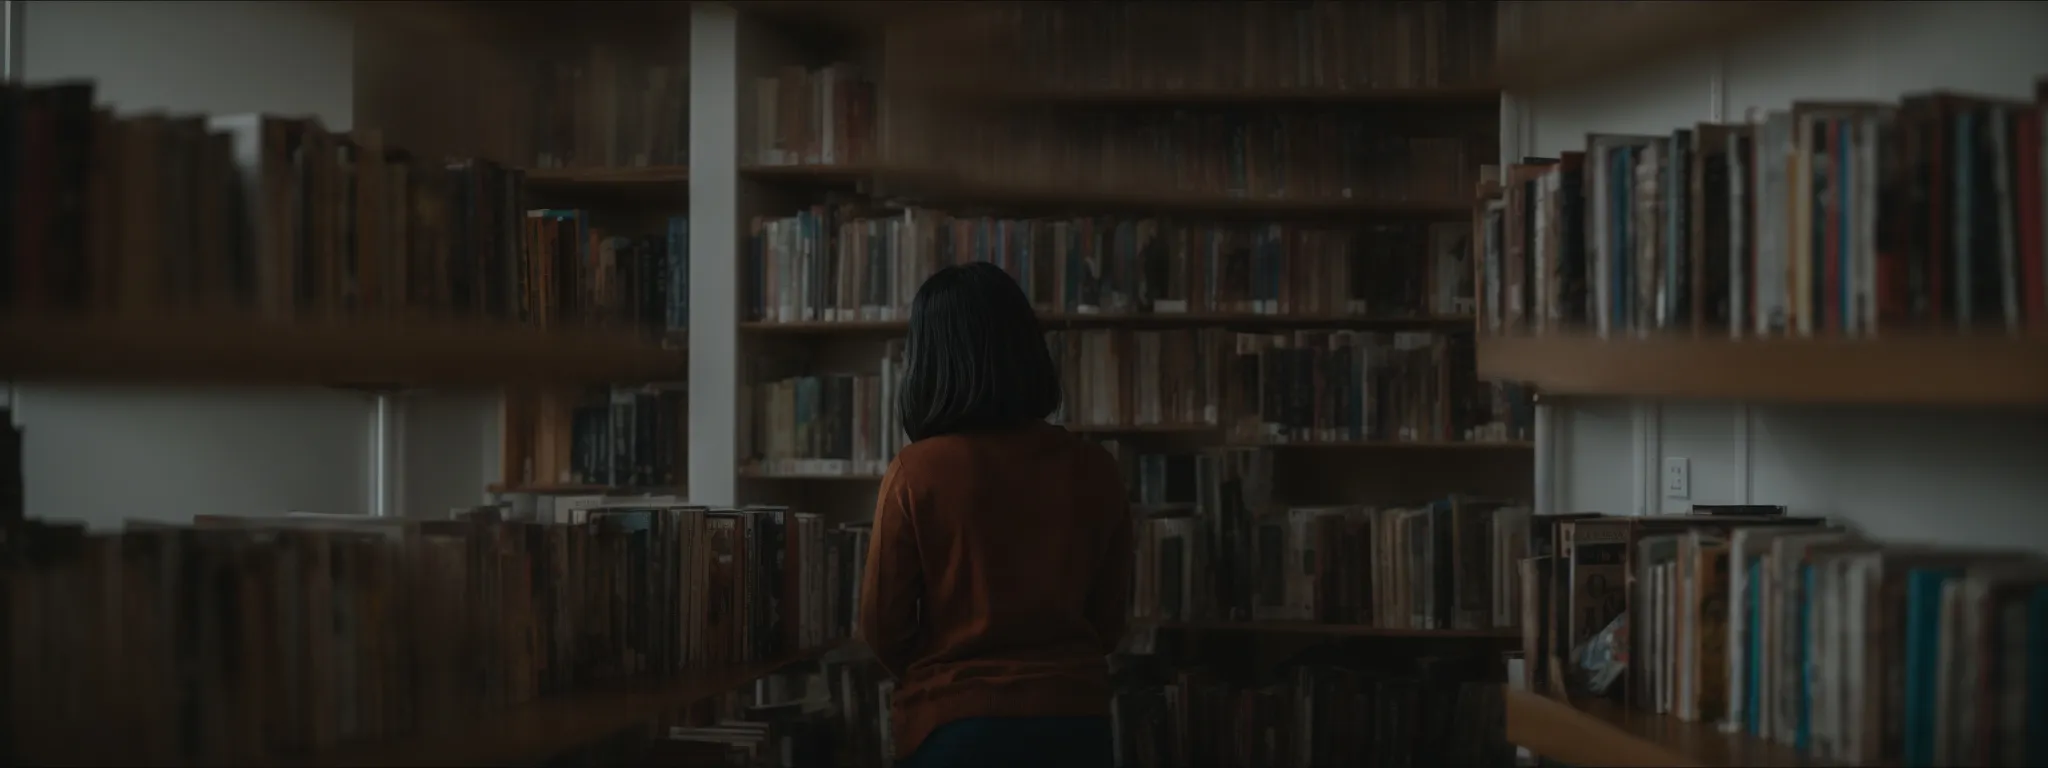 a person browsing through an assorted collection of books in a well-lit, quiet library.